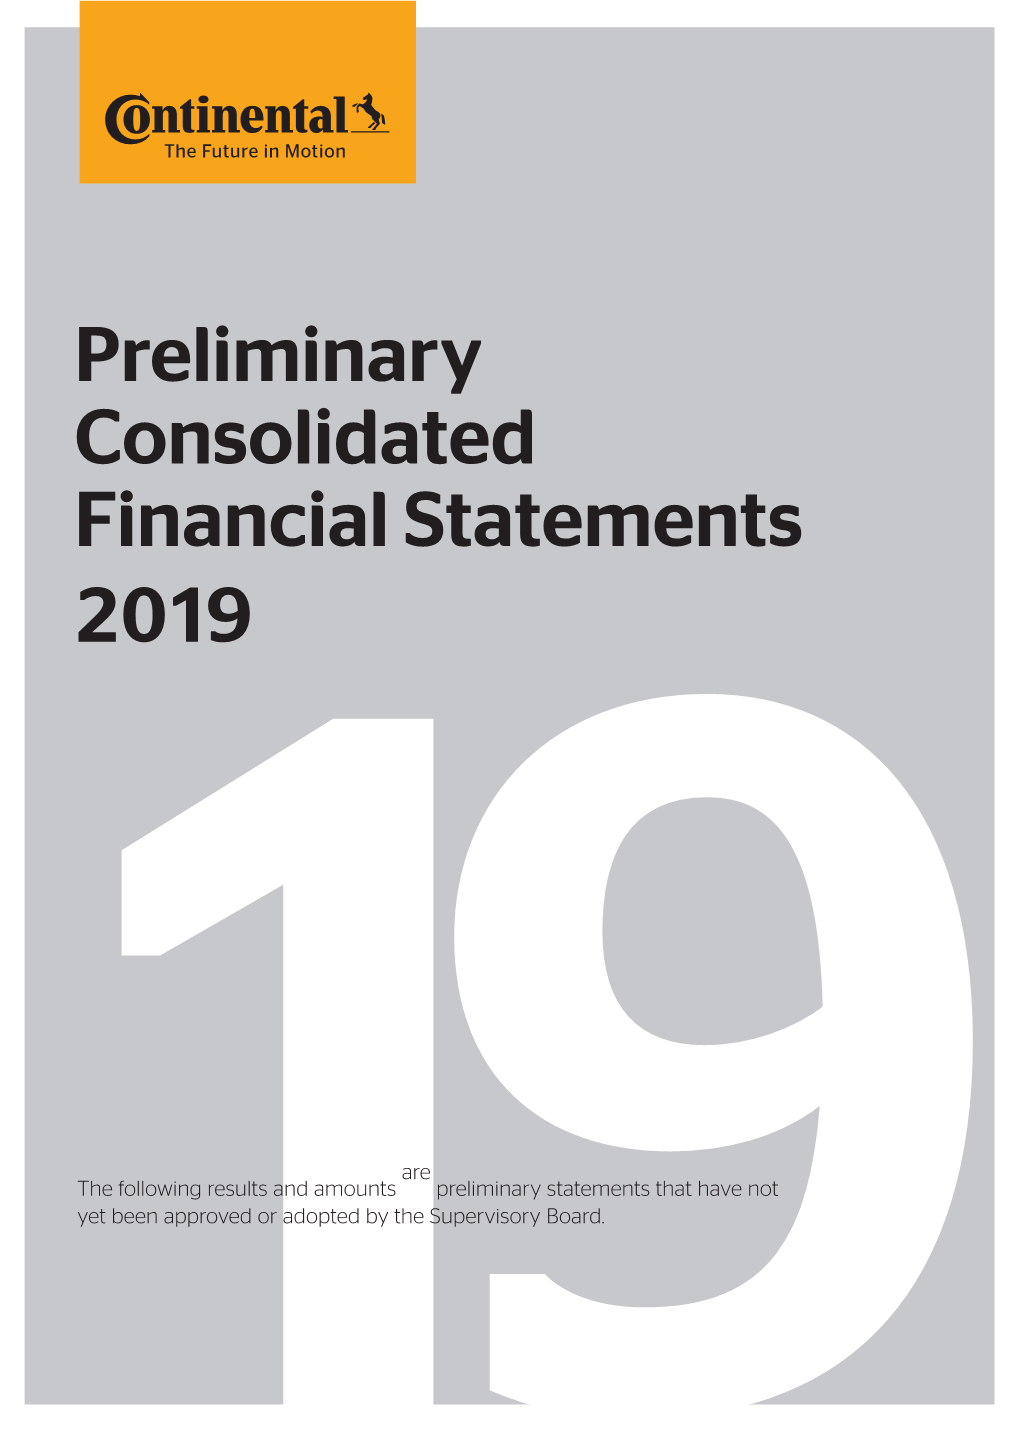 Preliminary Consolidated Financial Statements 2019